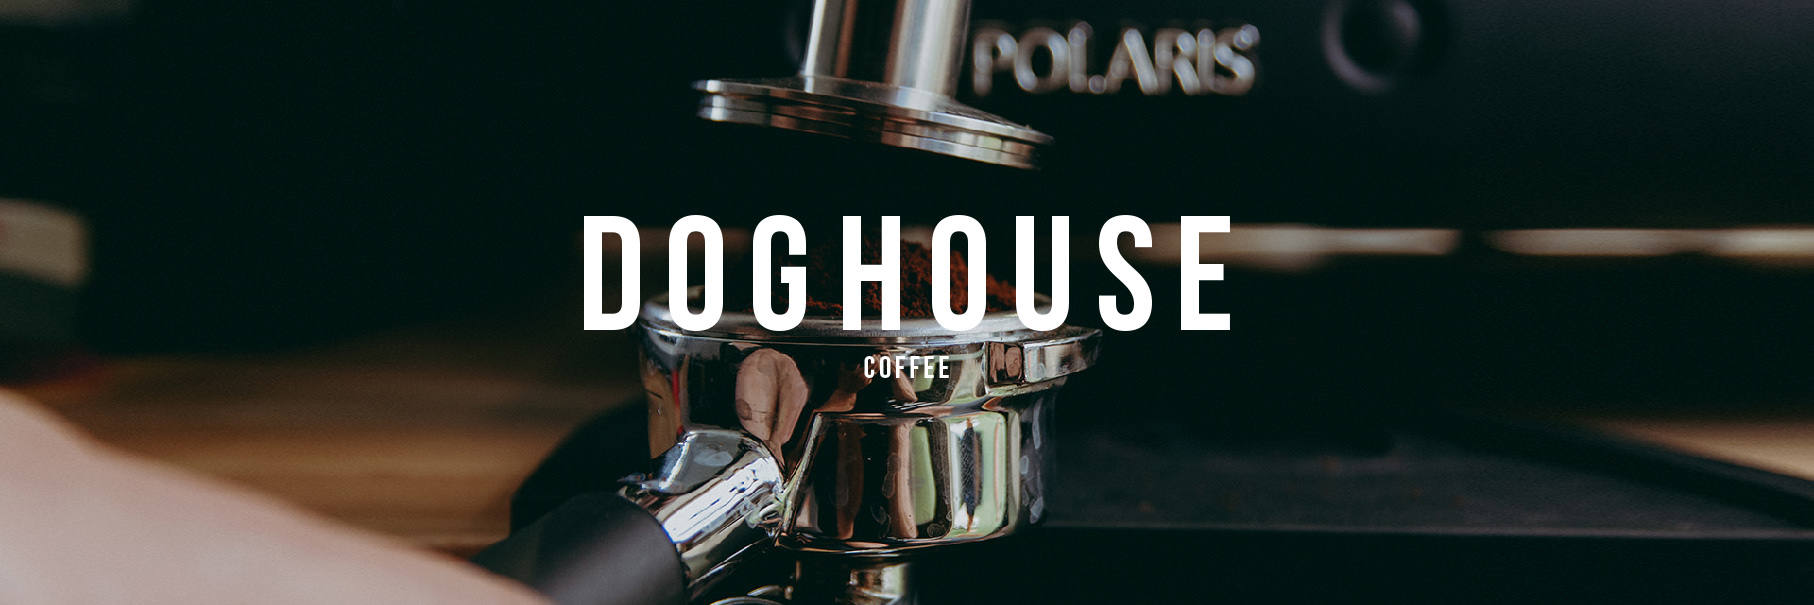 Doghouse coffee shop